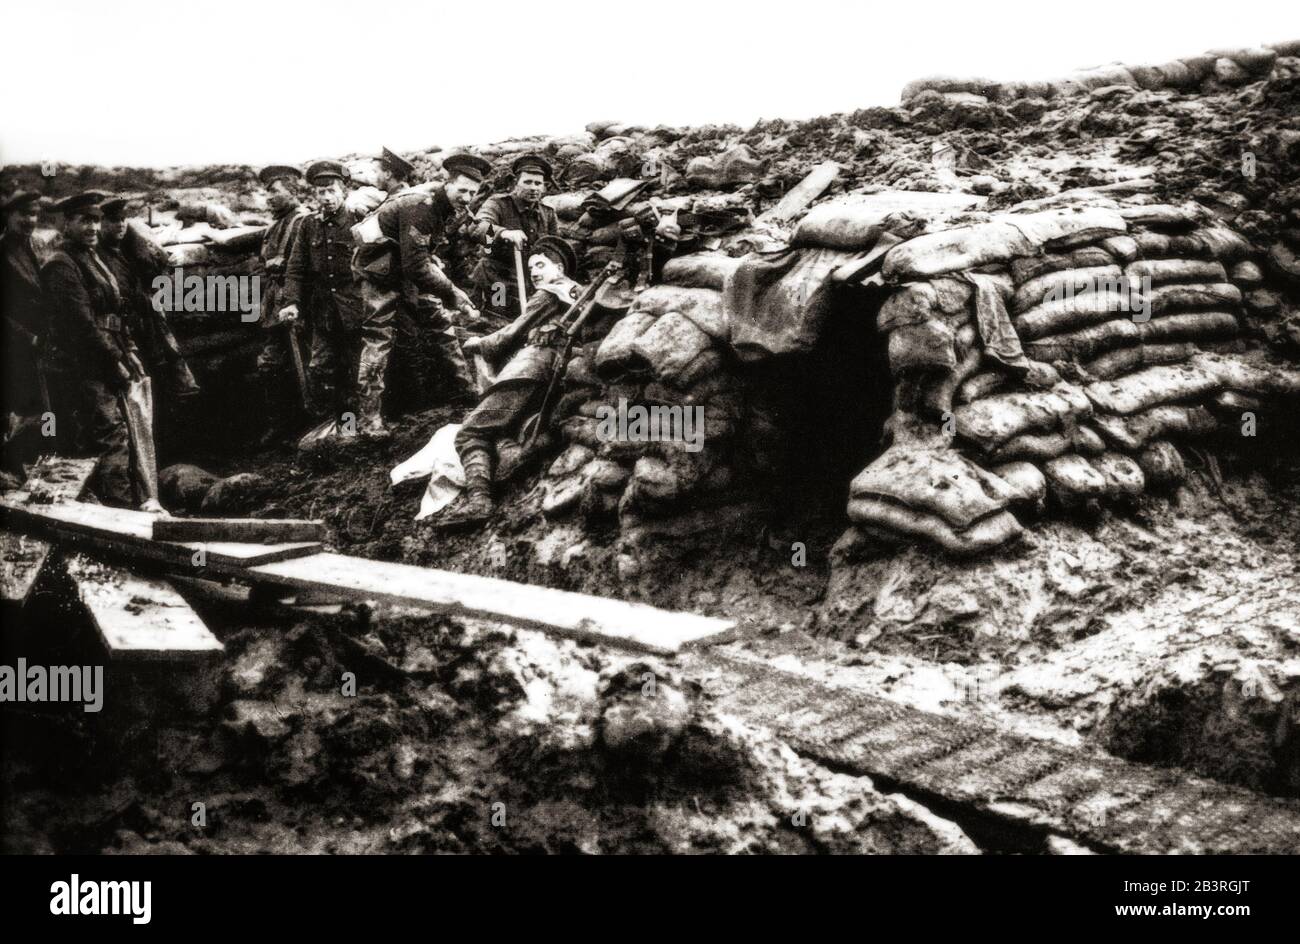 British soldiers of the Second Battalion Scots Guards repairing sandbags during the winter of 1915 of the First World War in the trenches at Levantine Sector in the Pas-de-Calais department in the Hauts-de-France region of France. Stock Photo